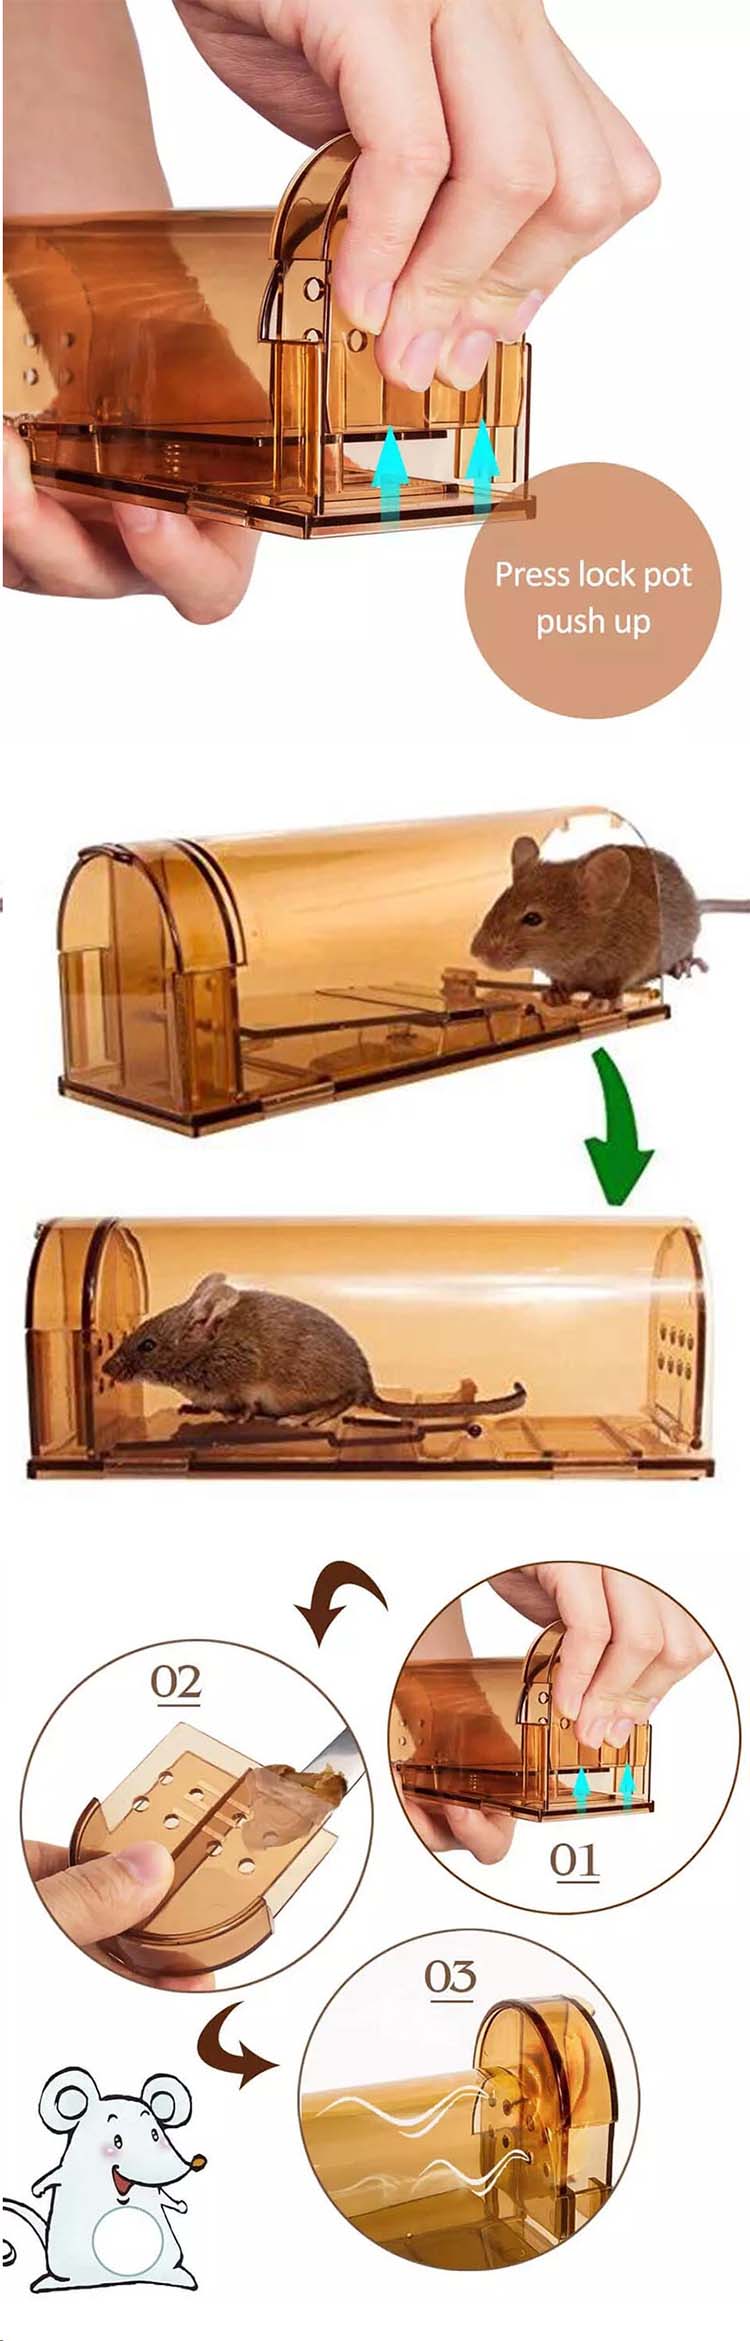 2019 Amazon Hot Sell Household Plastic Humane Live Catch Smart Mouse Rat Trap Mouse Trap Cage03